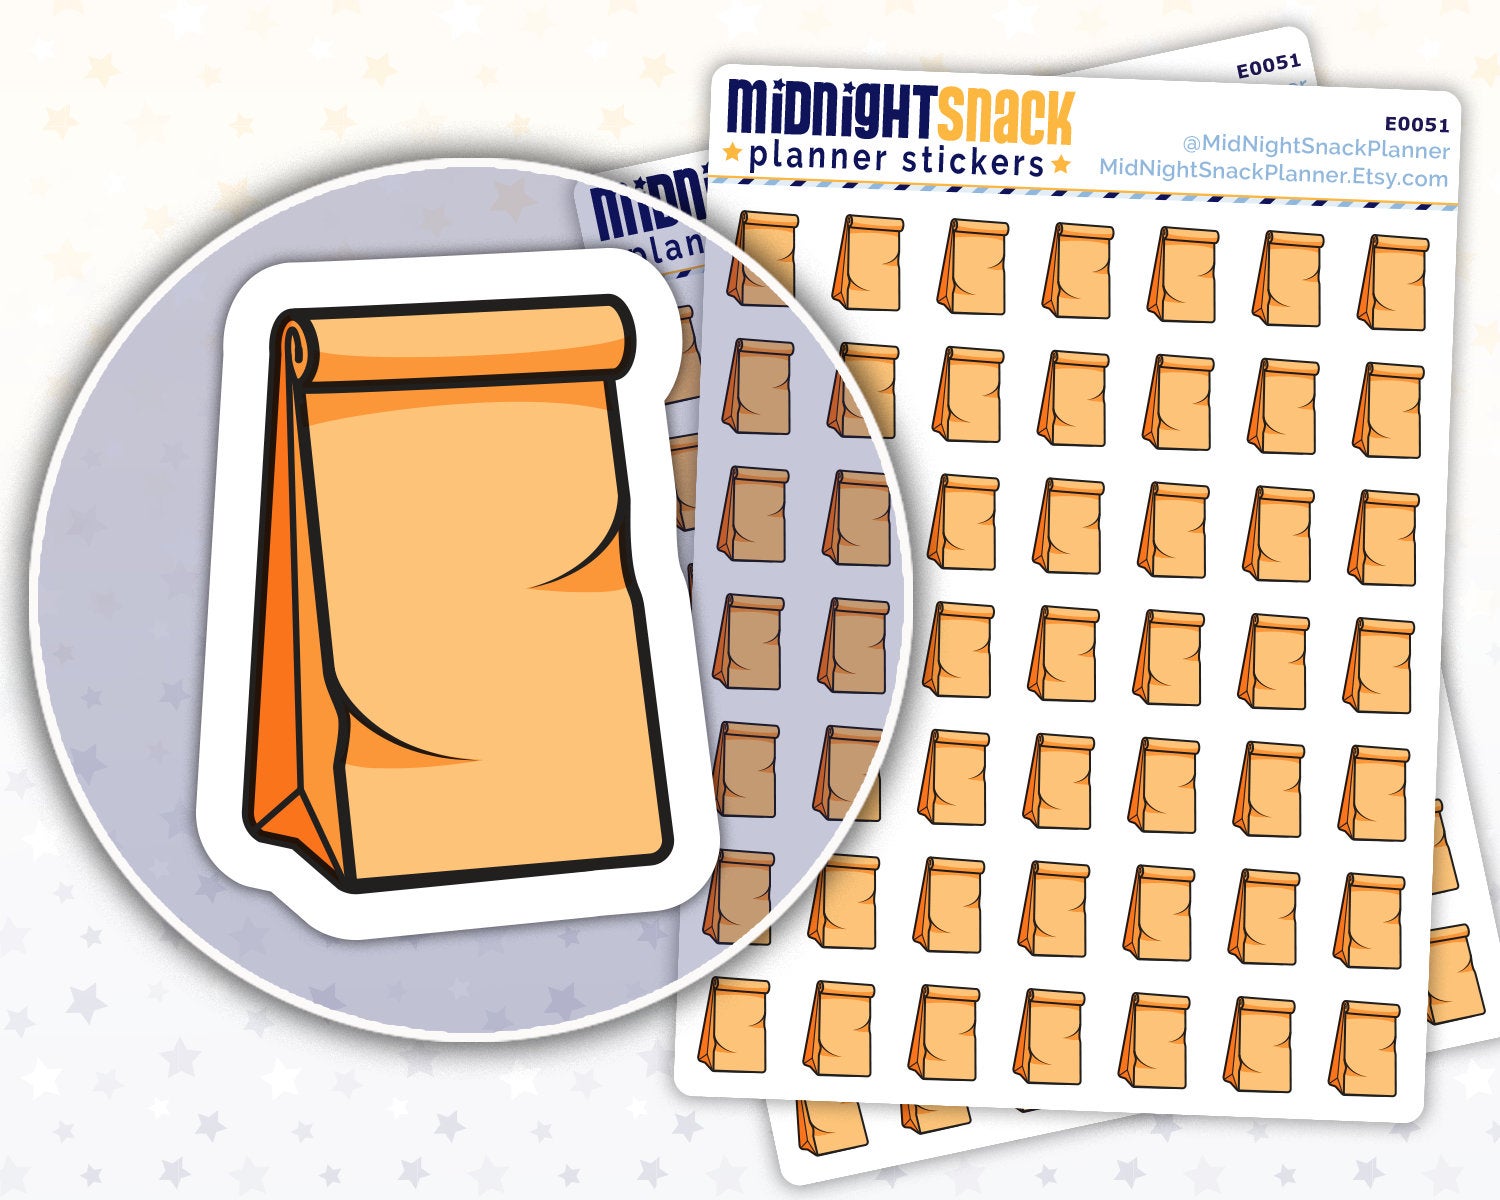 Packed Lunch Icon: Meal Planner Stickers Midnight Snack Planner